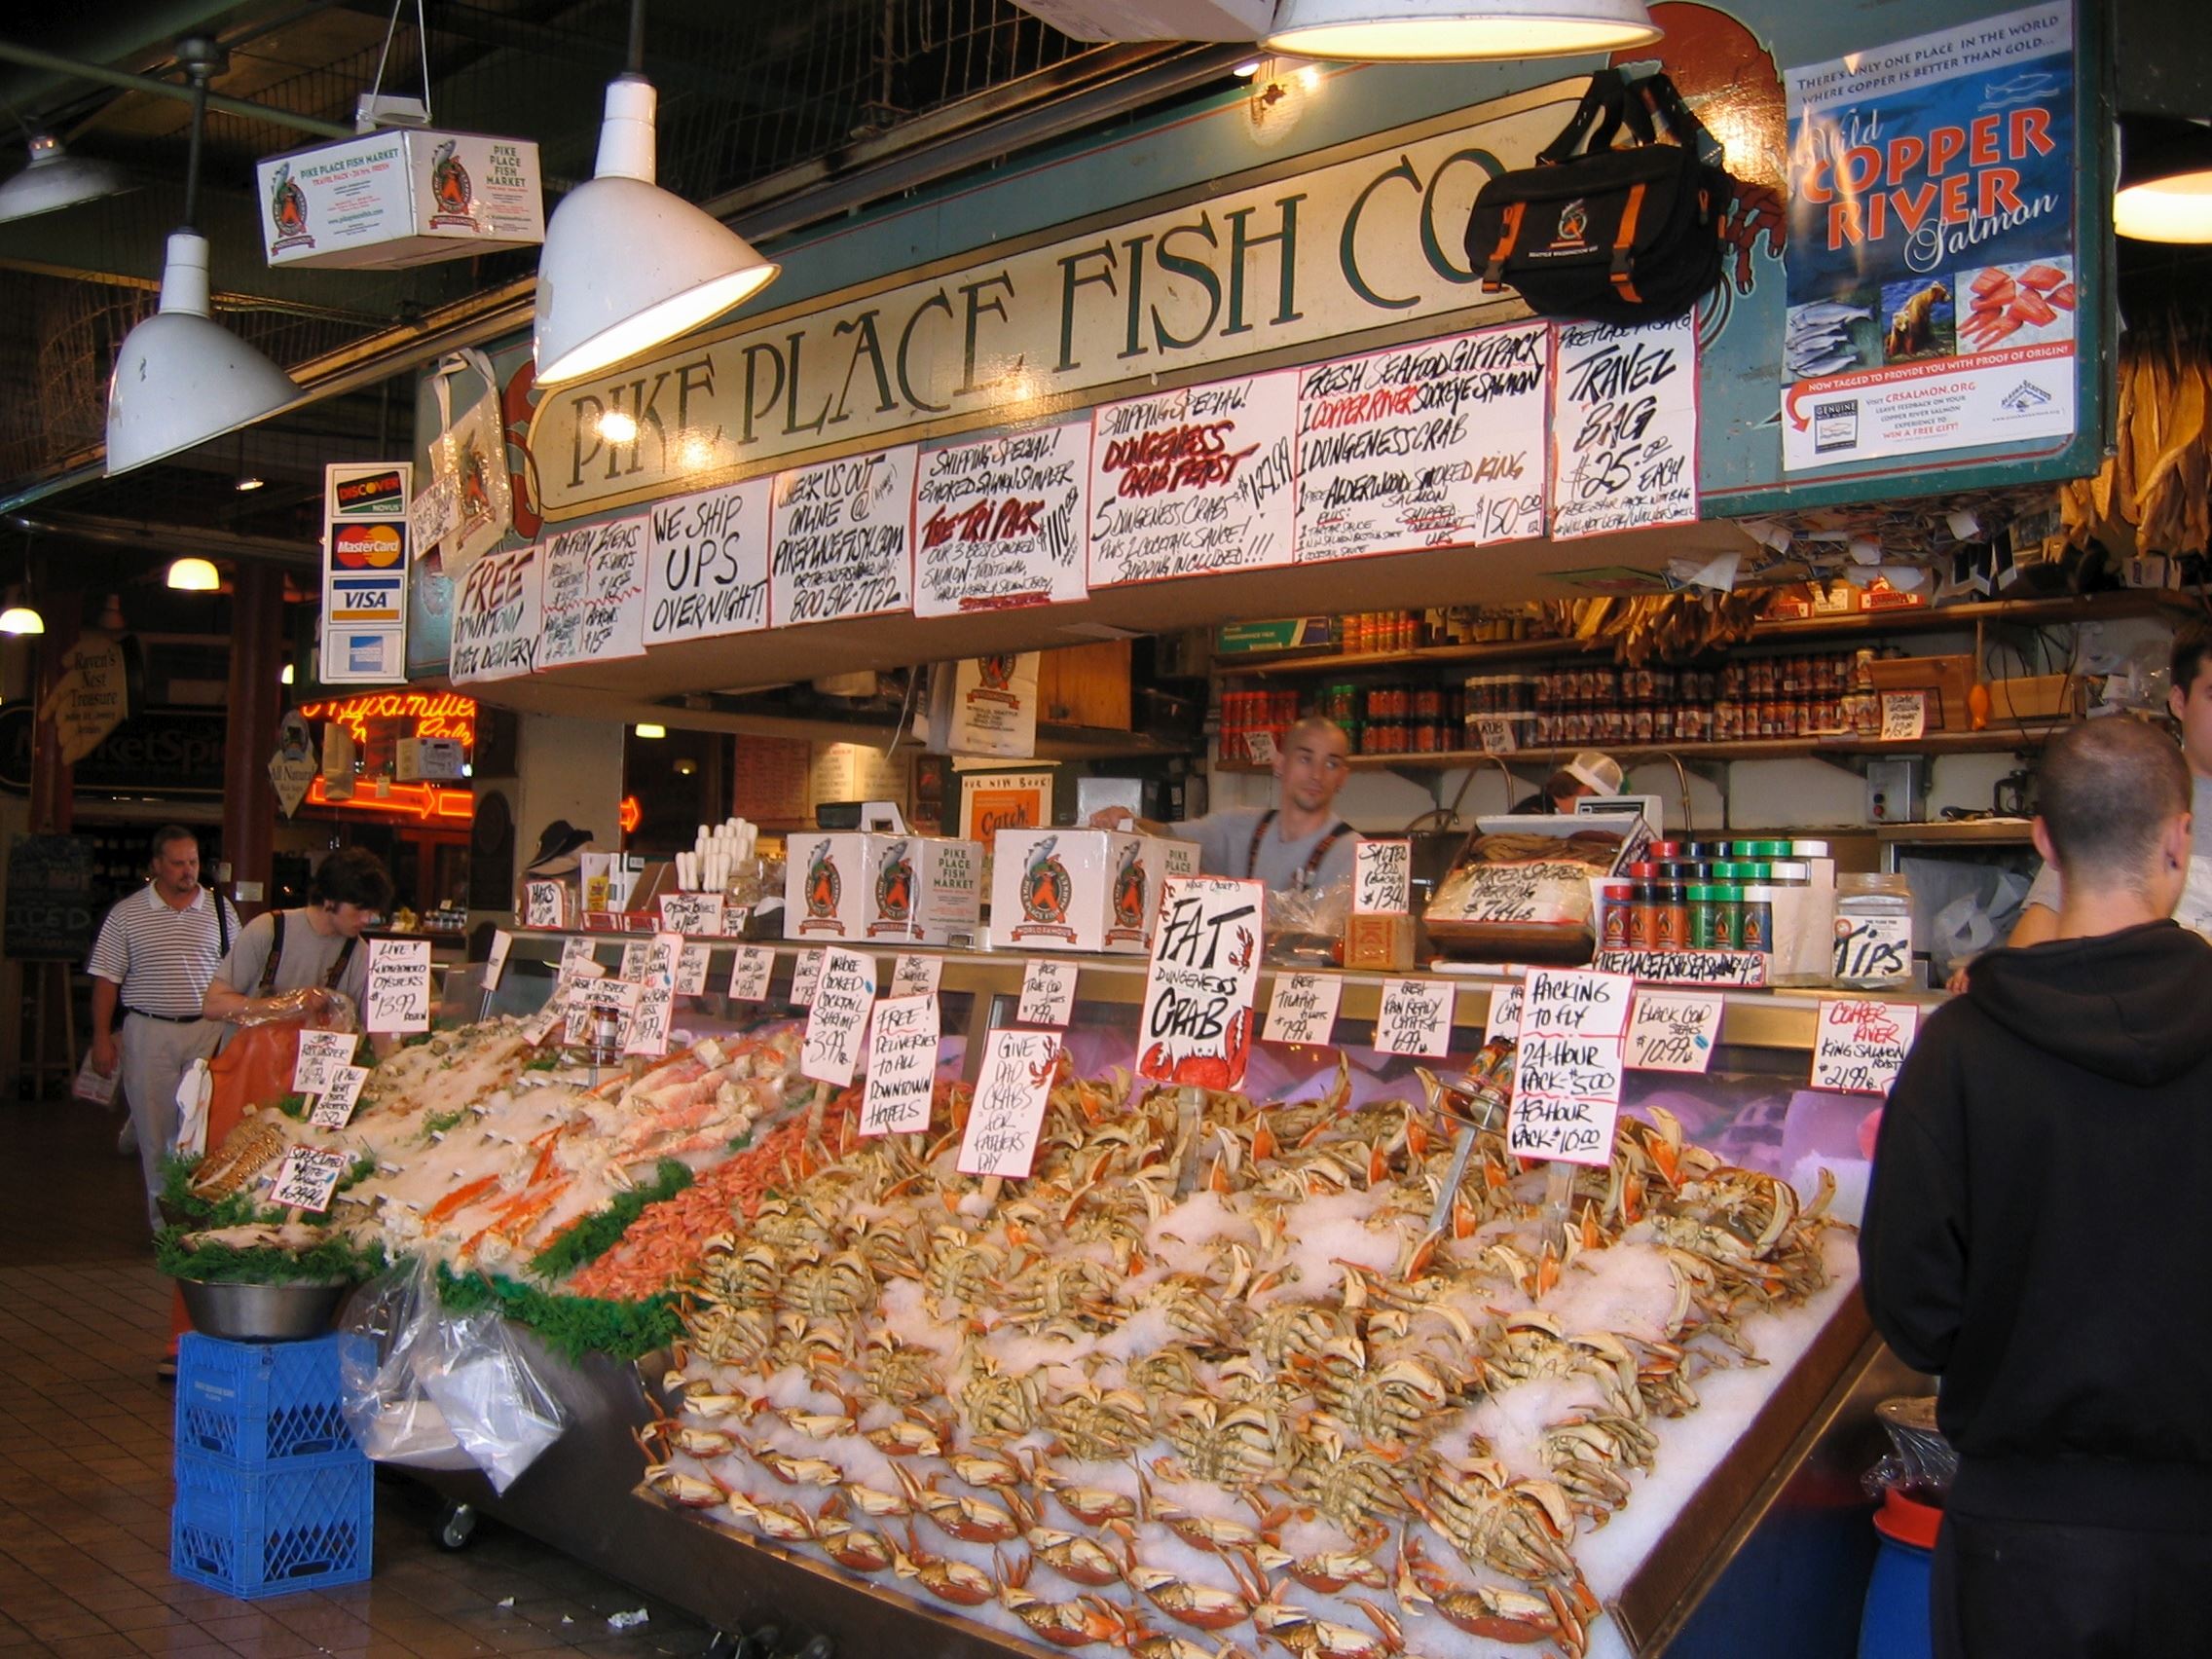 Seattle's pikes place fish market